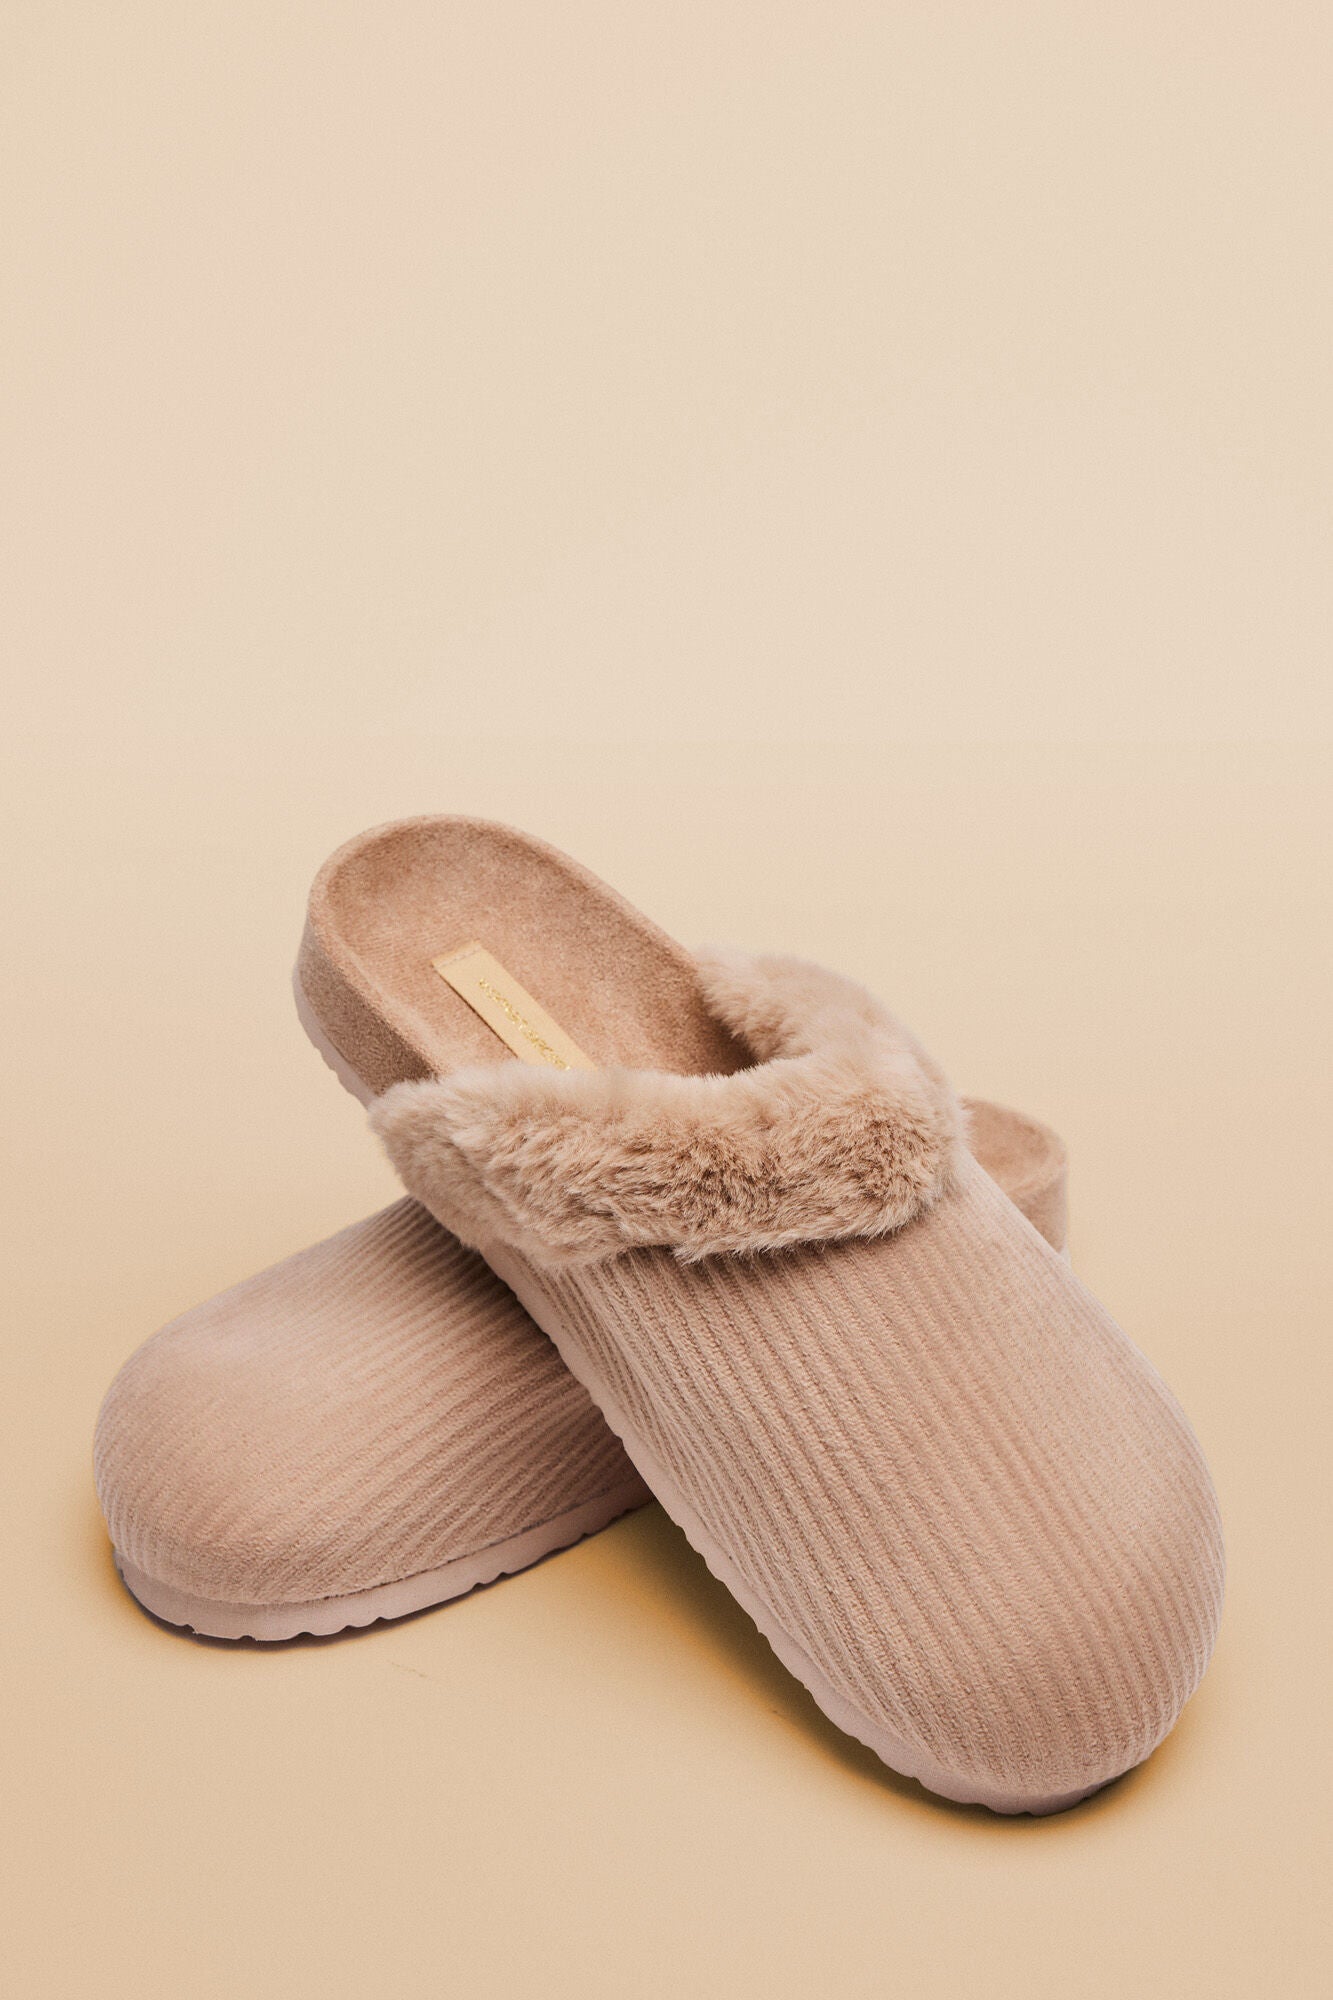 Slippers home corduroy brown clog